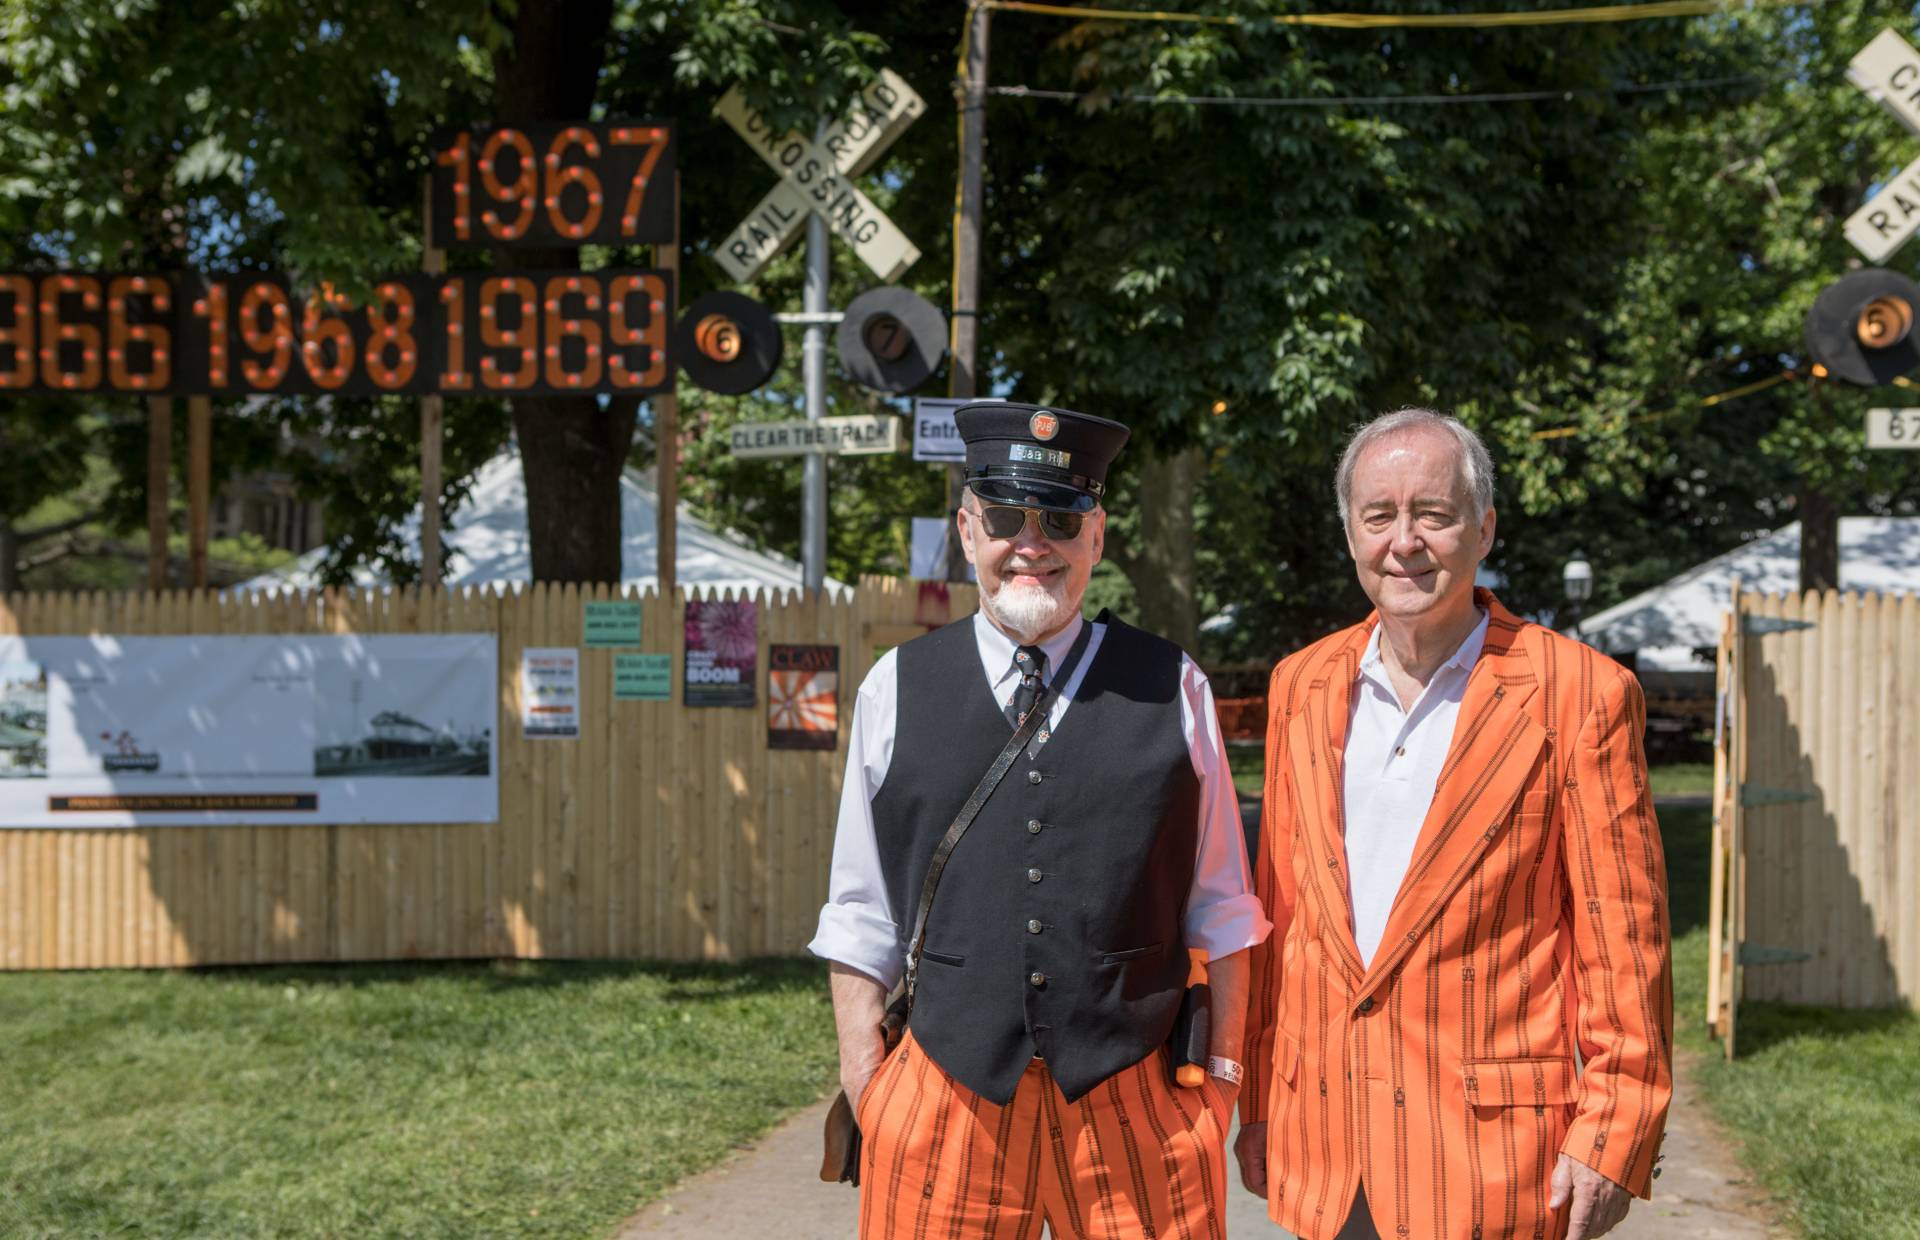 Tom and Tim Tulanko from class of 1967 in front of Reunions fence